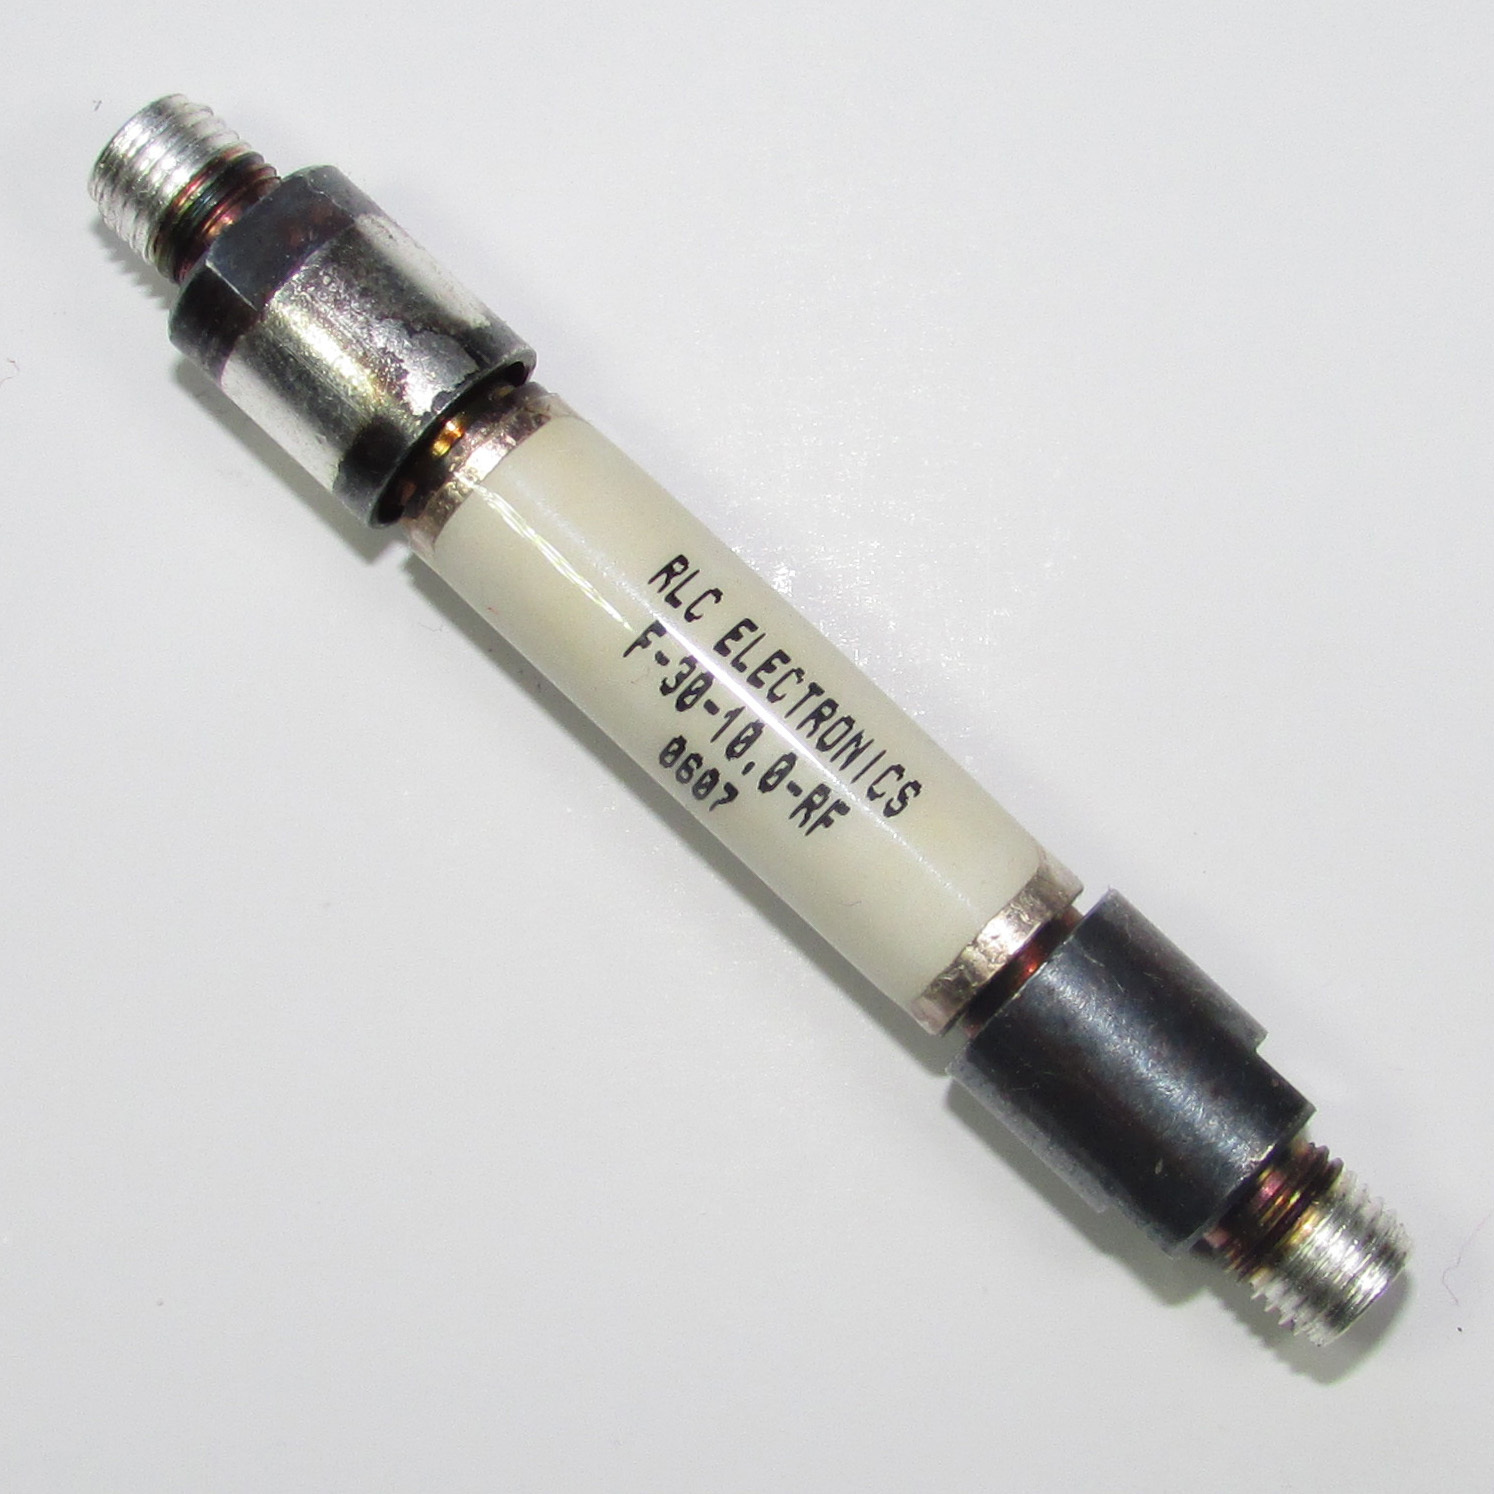 American RLC F30-10.0-RF DC-10GHz SMA RF microwave coaxial low-pass filter